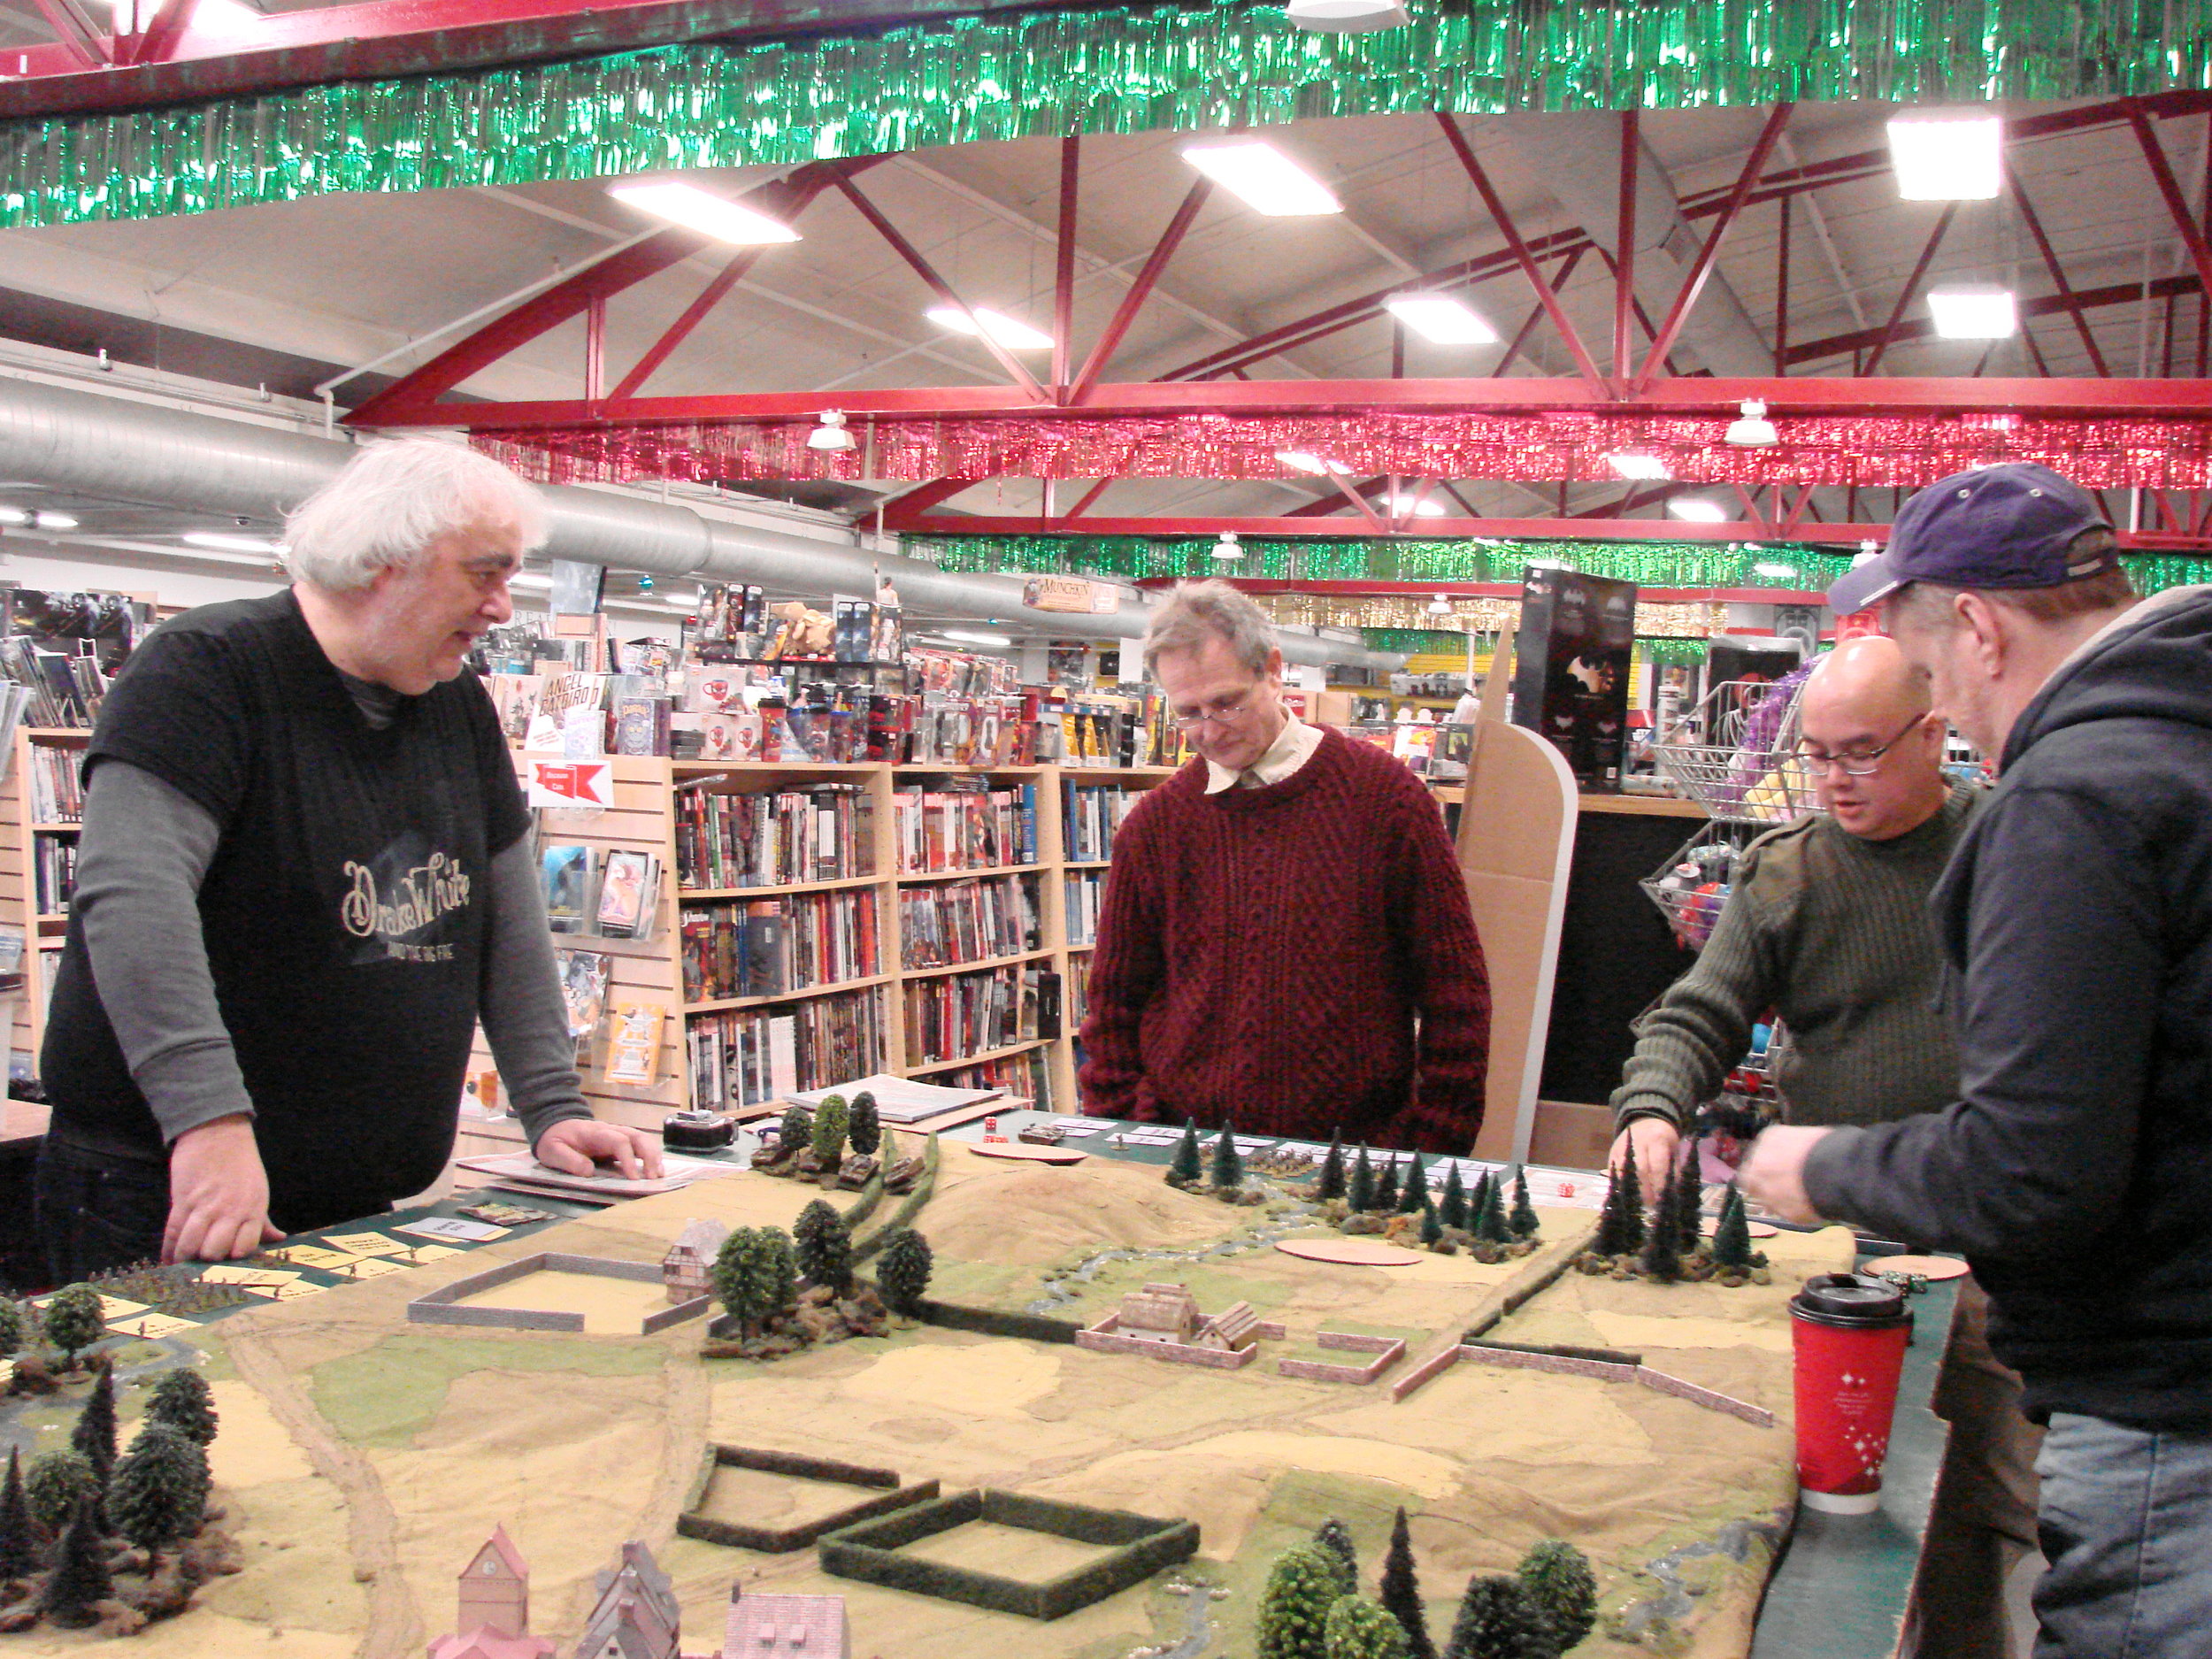 Mike Whitaker, guest gamemaster for the day, introduces the scenario to the German commanders.